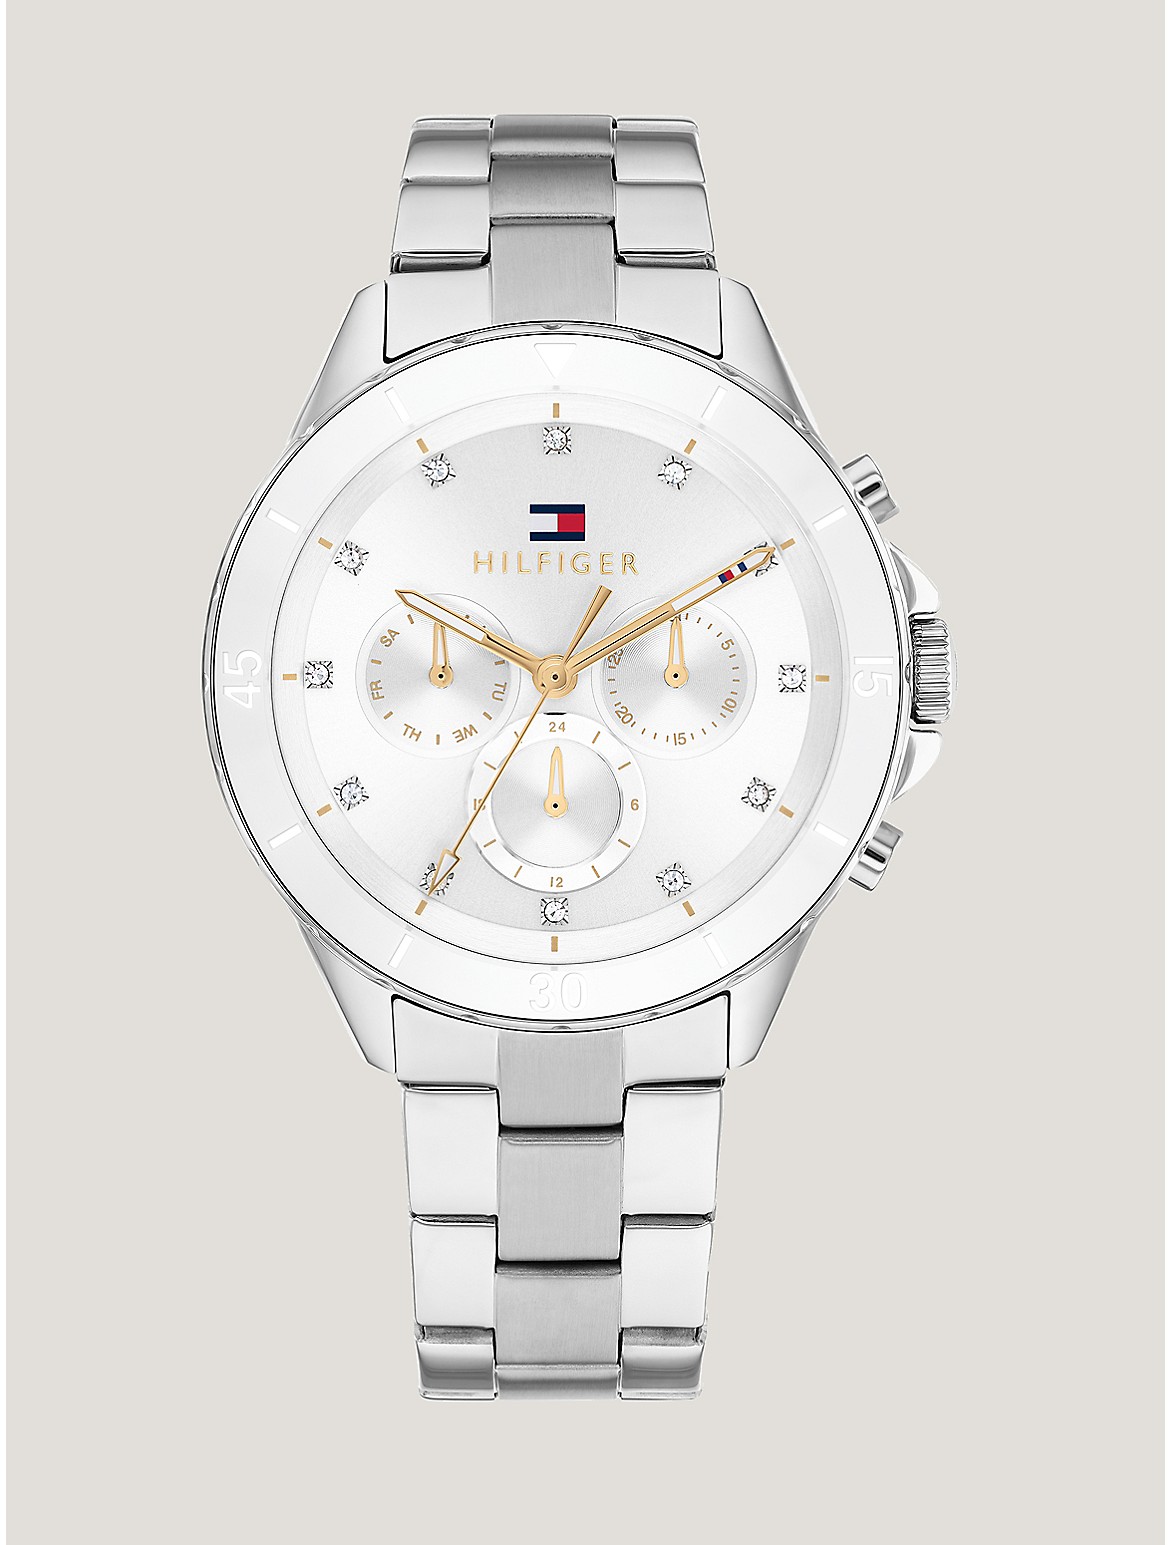 Tommy Hilfiger Women's Watch with Sub-Dials and White Bezel